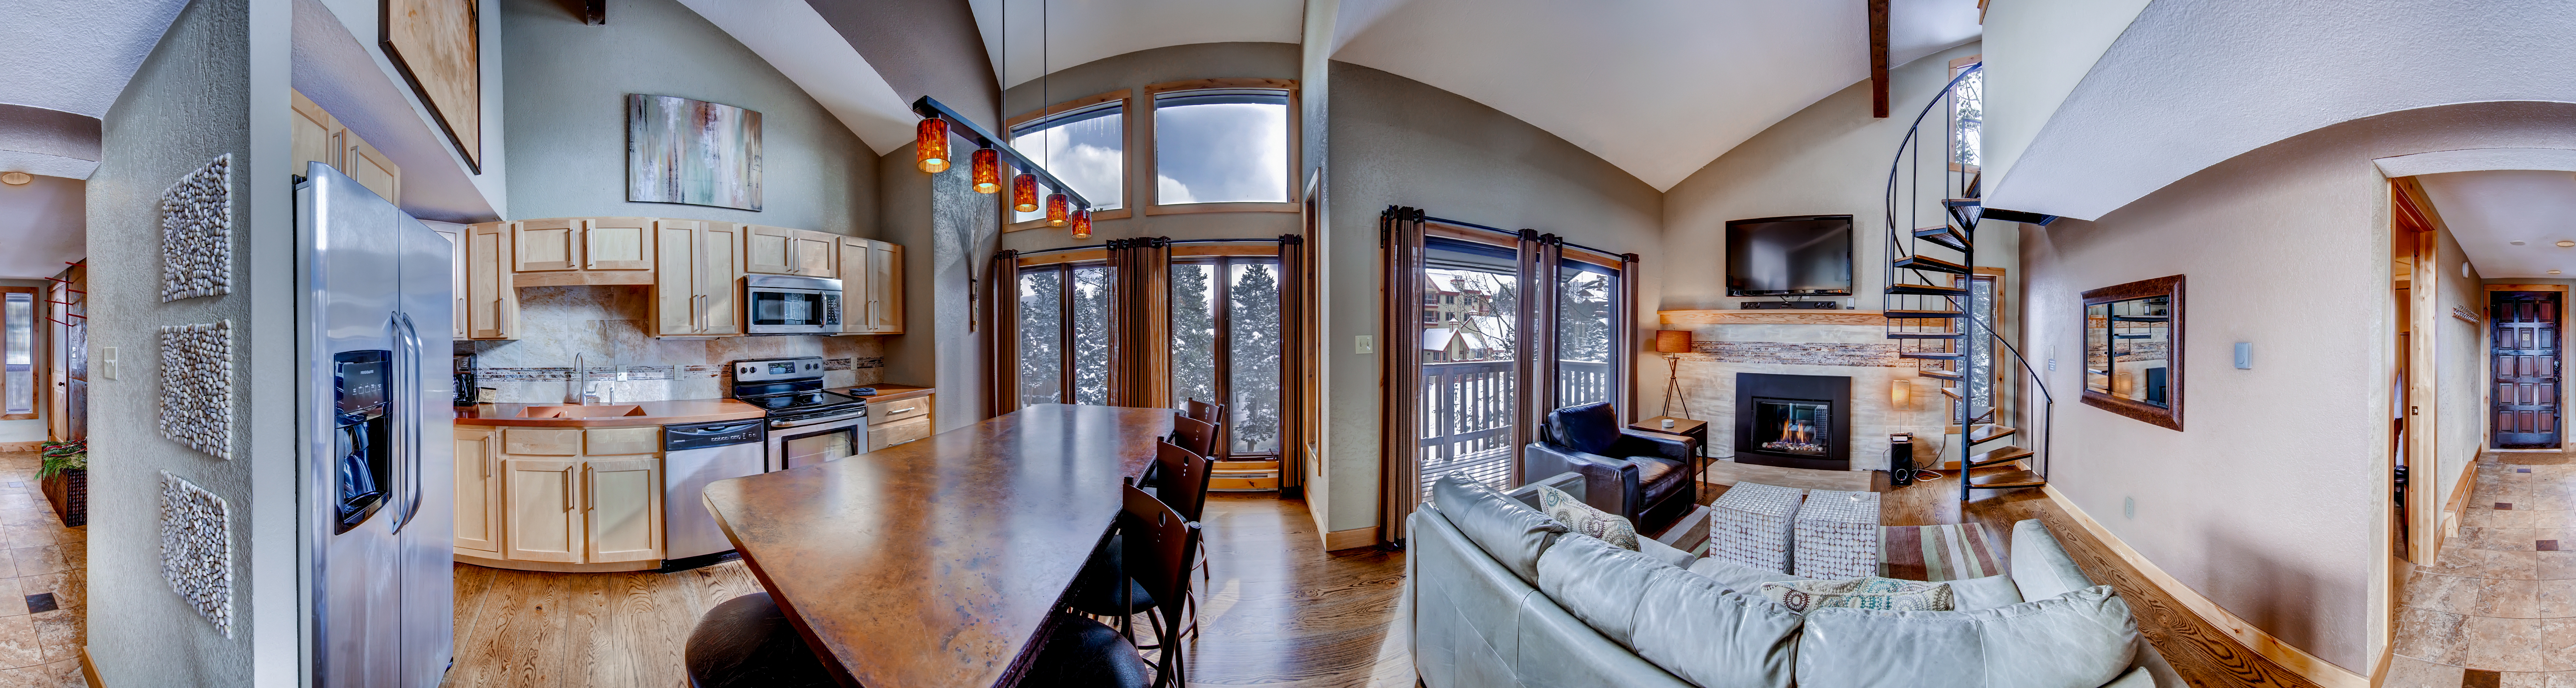 Panoramic view of the kitchen and living areas